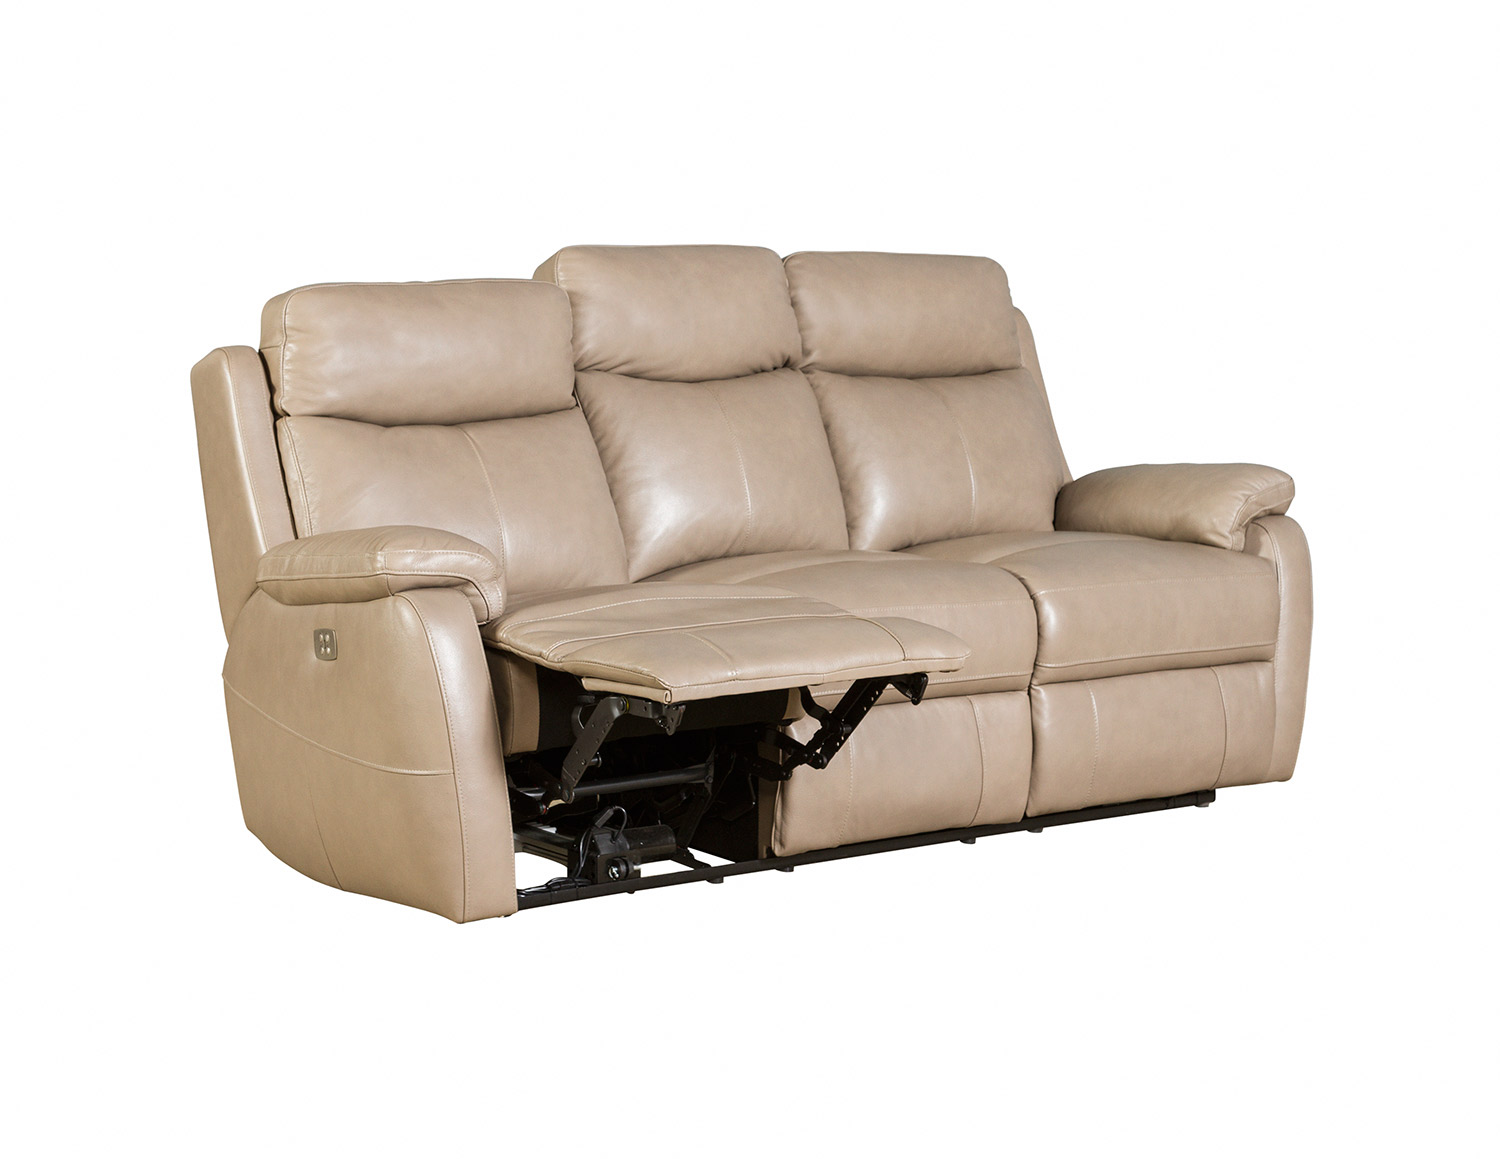 Barcalounger Brockton Power Reclining Sofa with Power Head Rests - Gable Twine/Leather Match